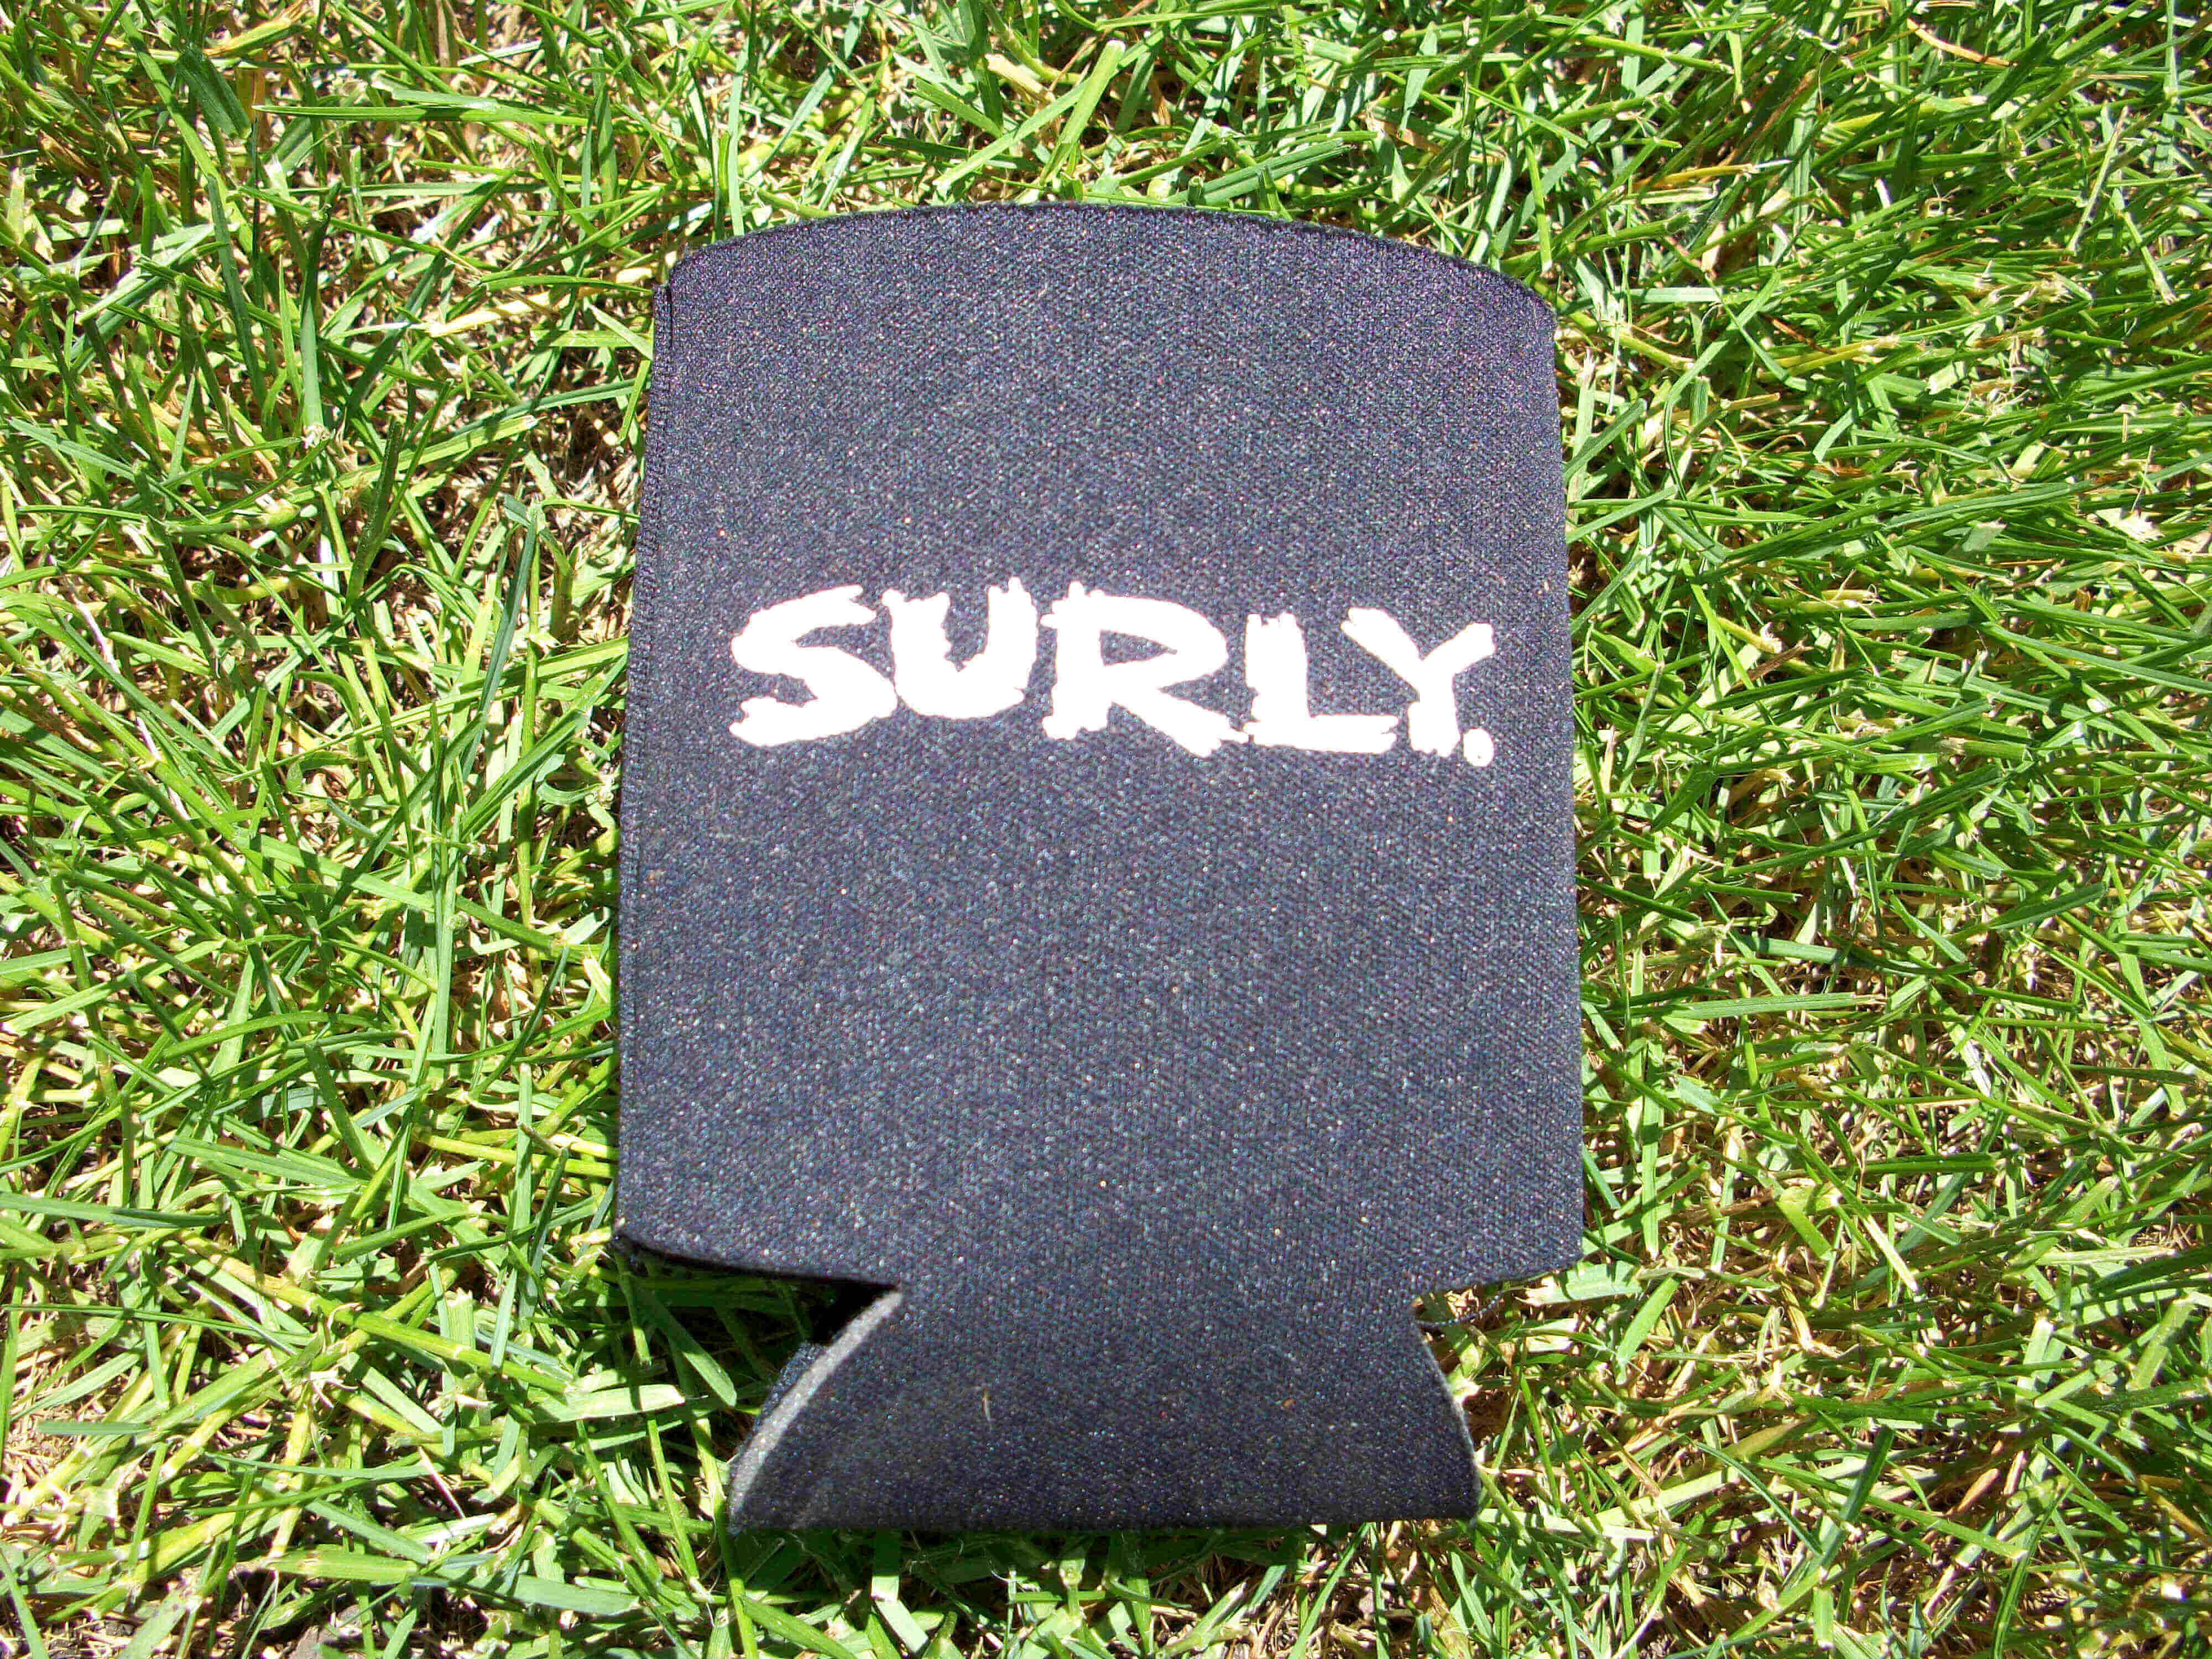 Downward view of a flattened, black Surly can cooler with a white logo graphic, laying on grass